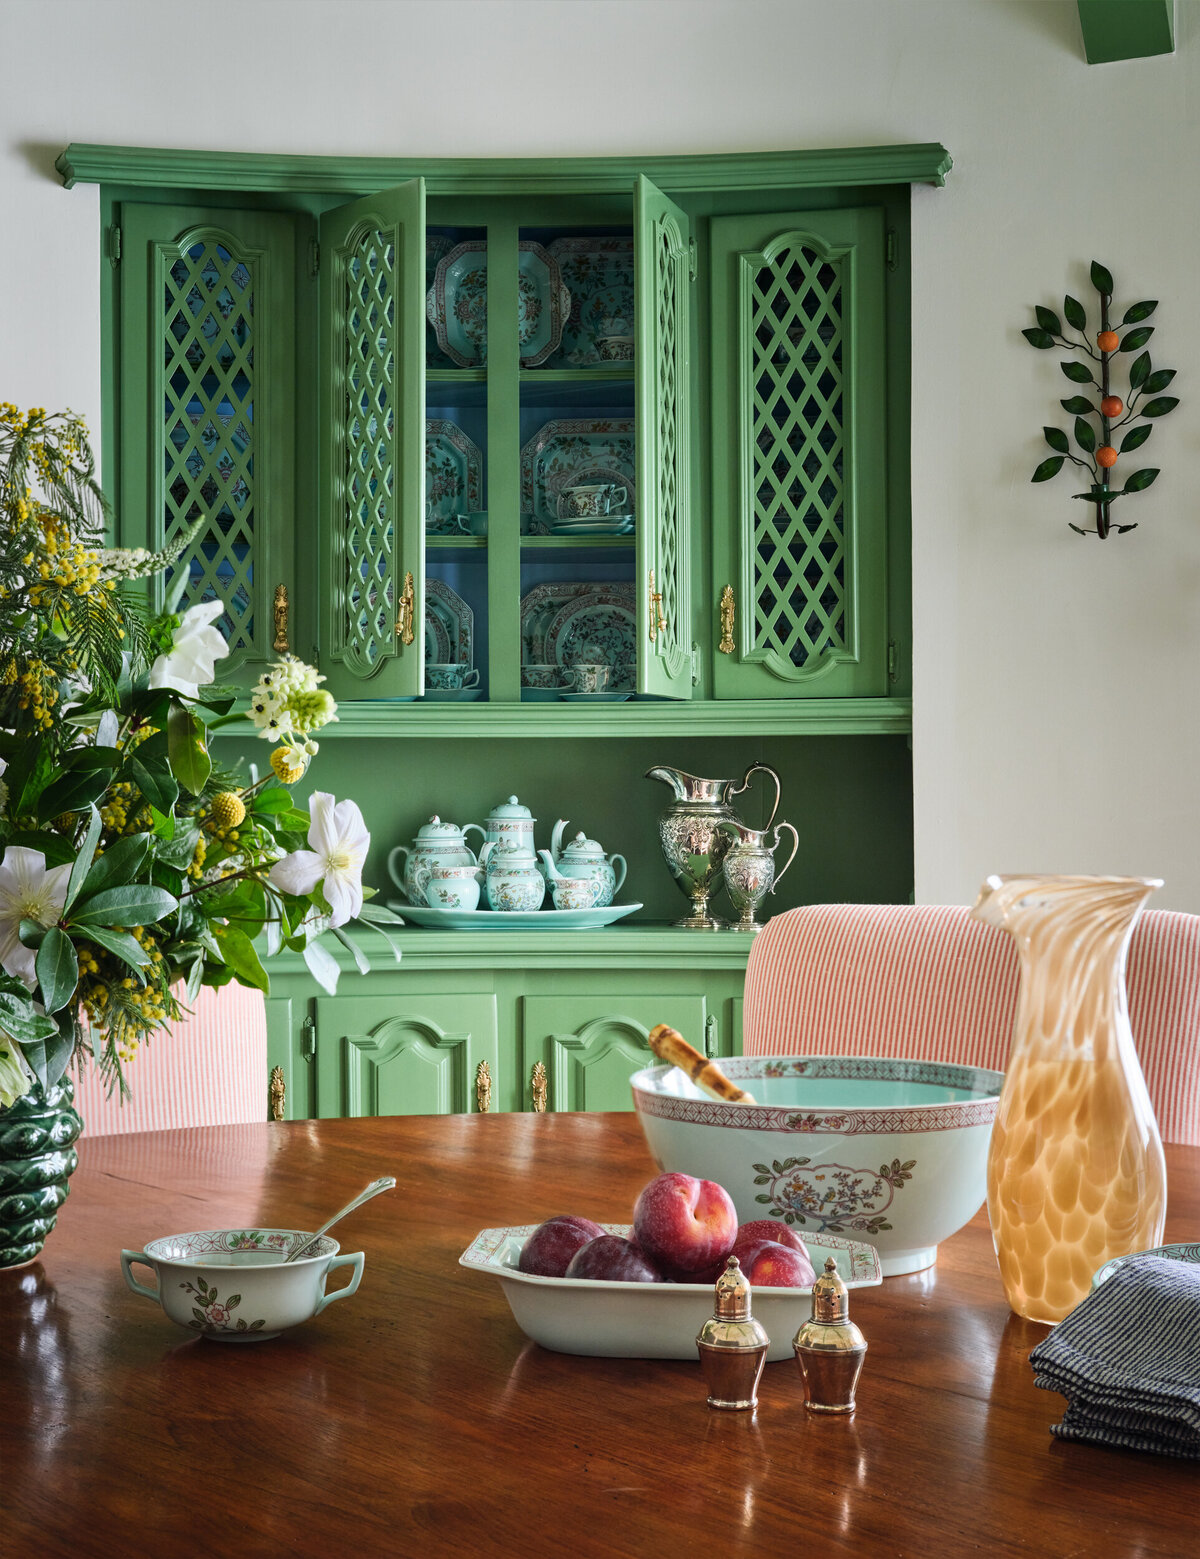 Kitchen Table with Dishes and Green Trellis Cabinets